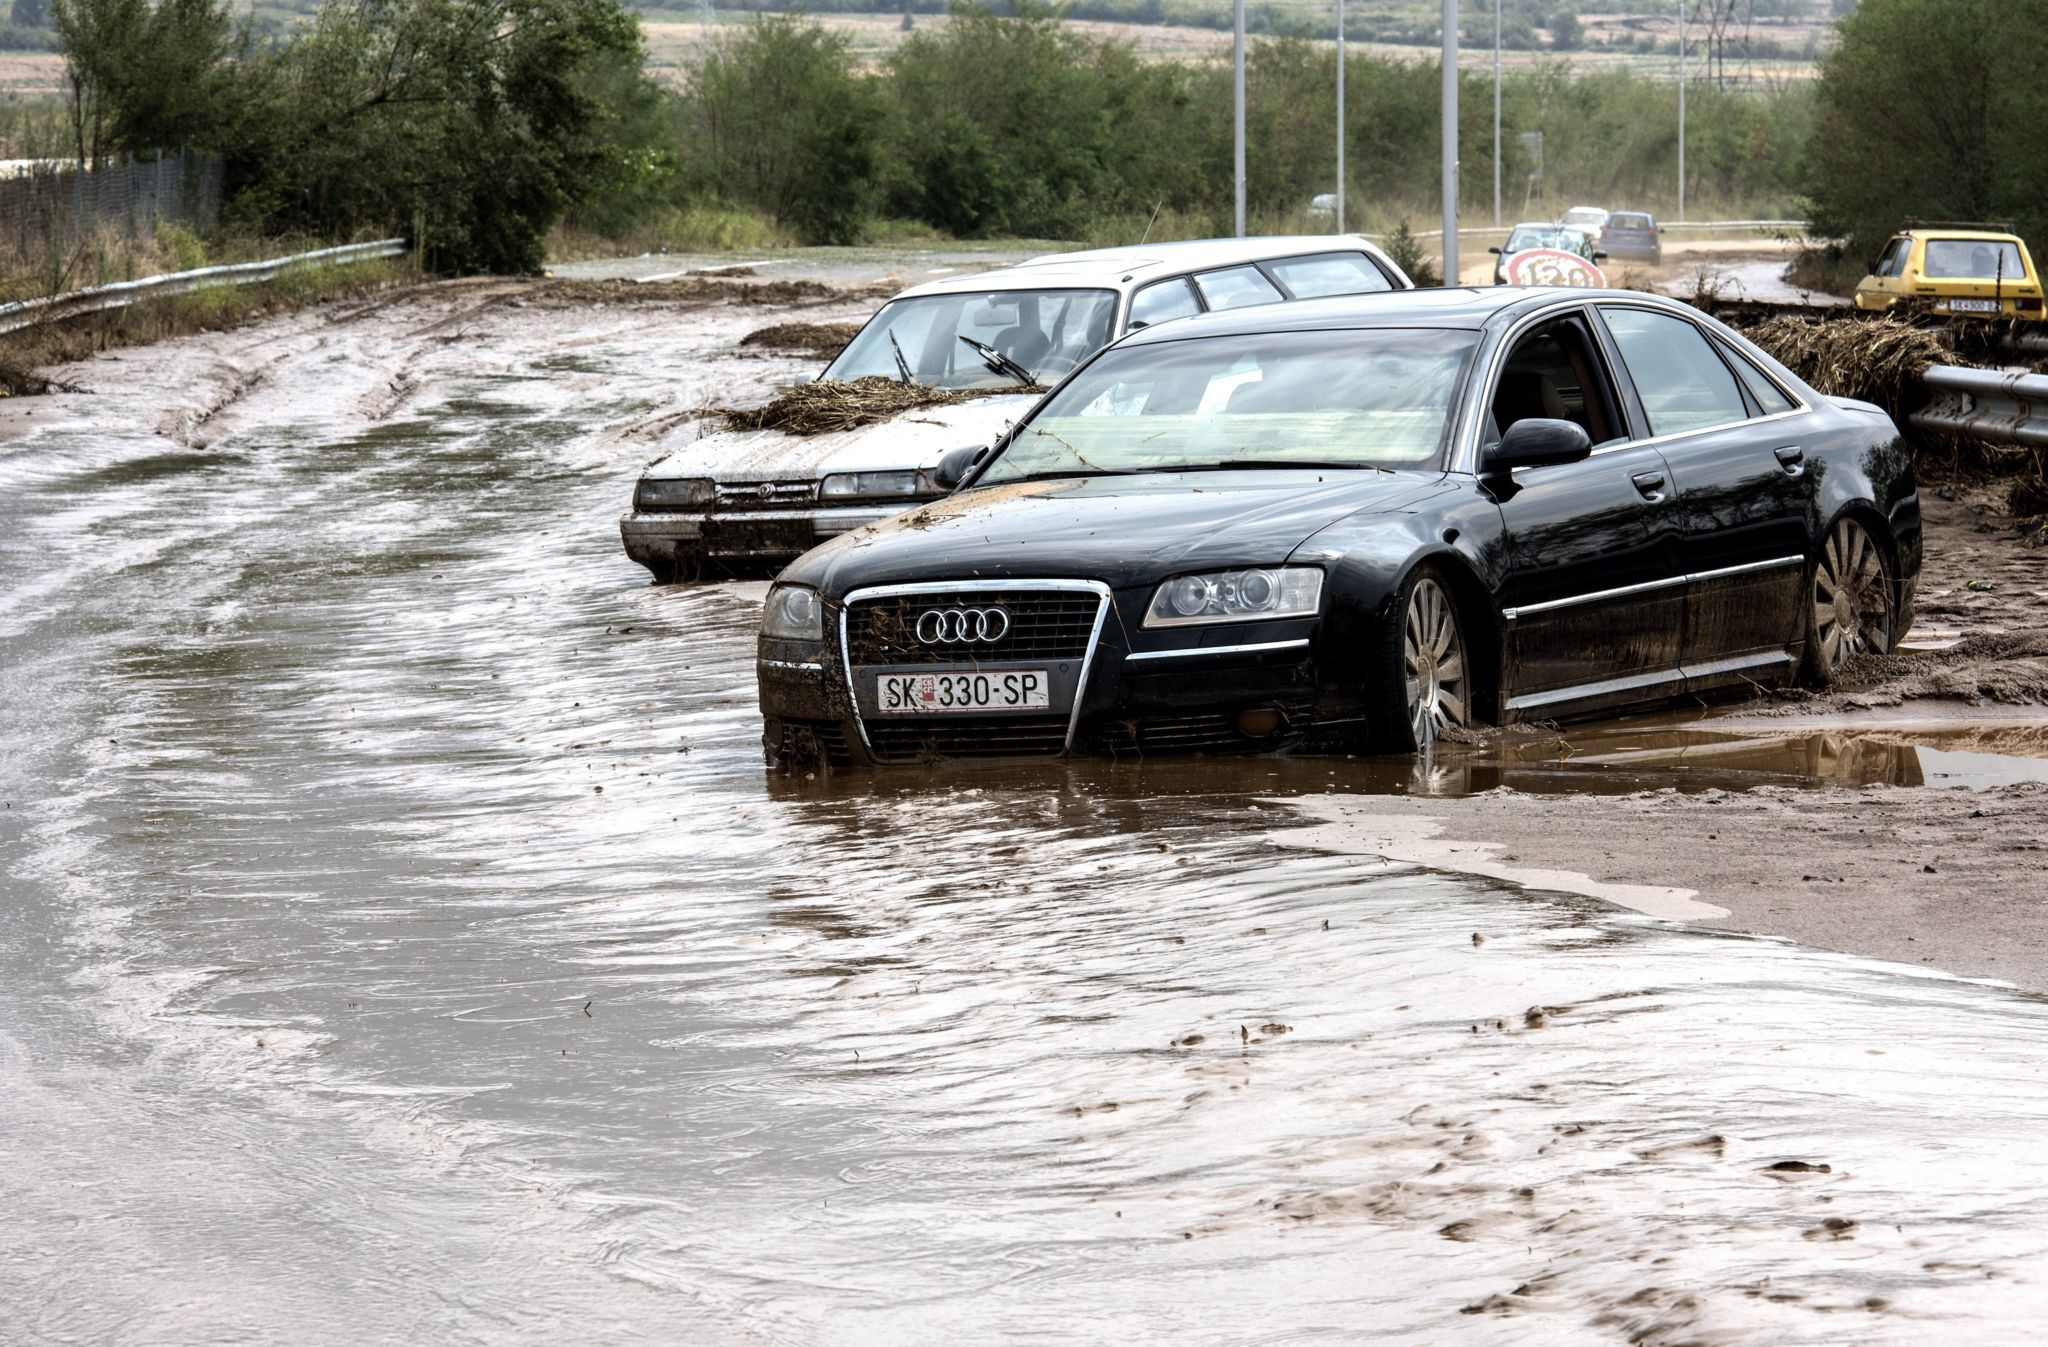 cars stuck in the mud next to flooded ring road